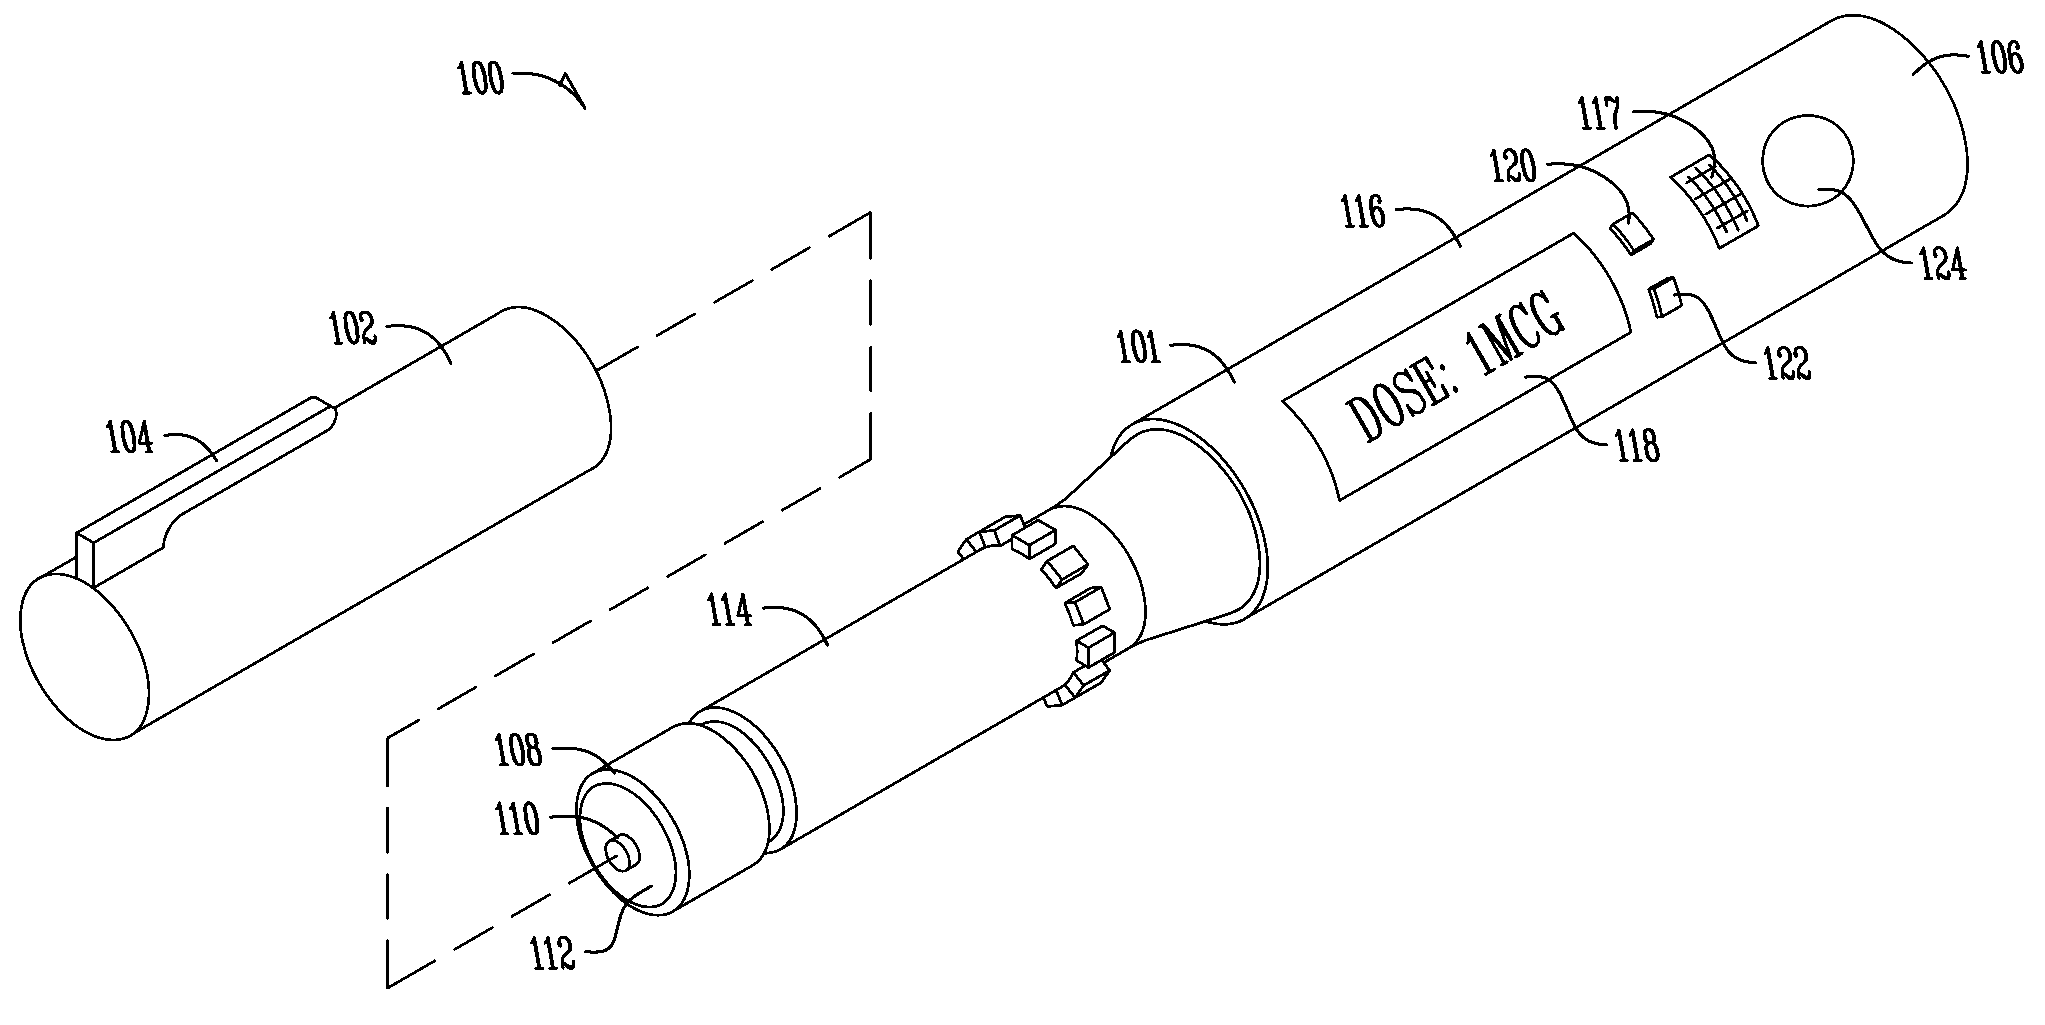 Self-contained medication injection system and method